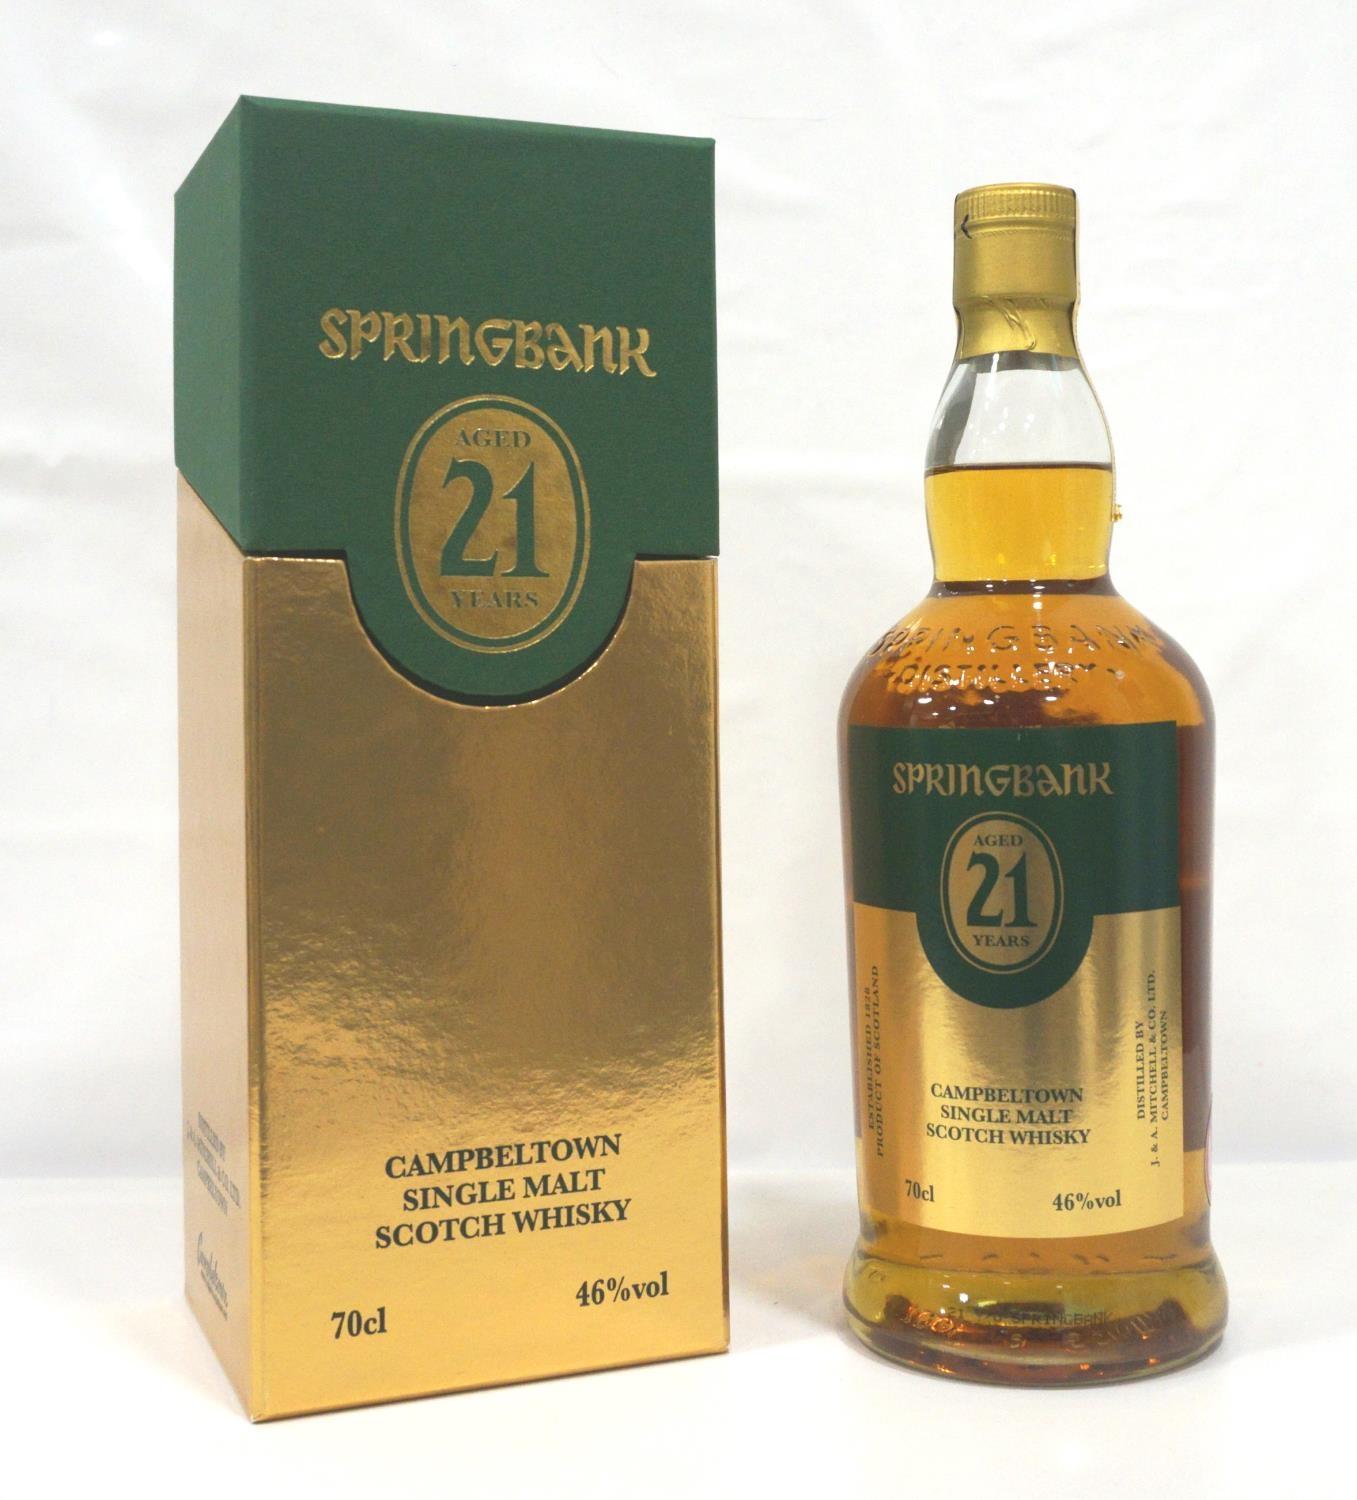 SPRINGBANK 21YO - 1ST CASK RUM MATURED A rare bottle from the Open Day in 2014. Springbank 21 Year